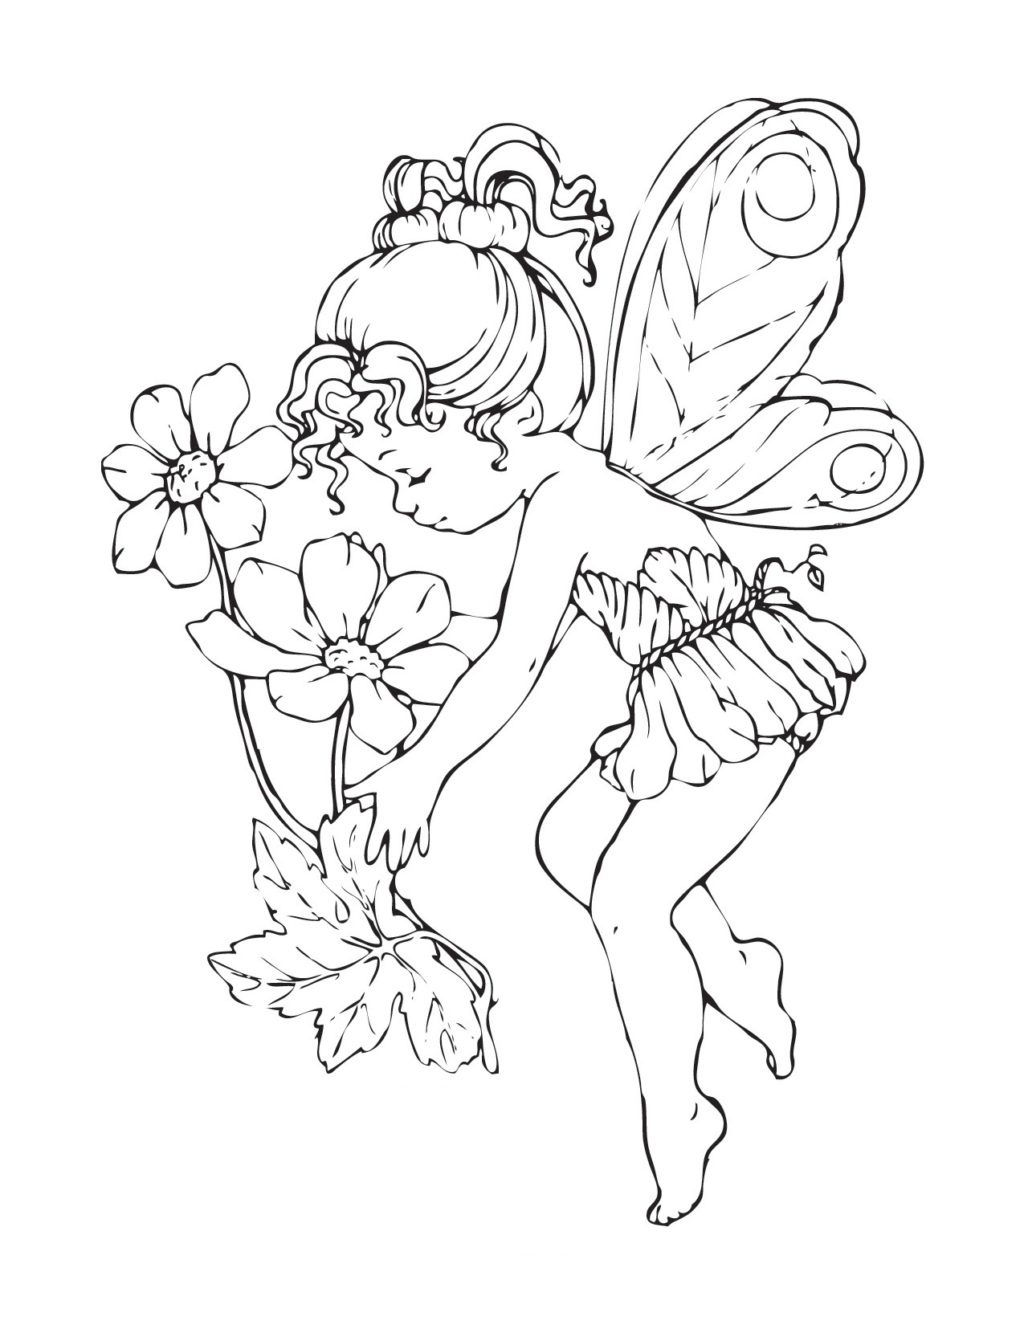 Coloring Book World ~ Free Printable Fairy Coloring Pages For Kids - Free Printable Fairy Coloring Pictures